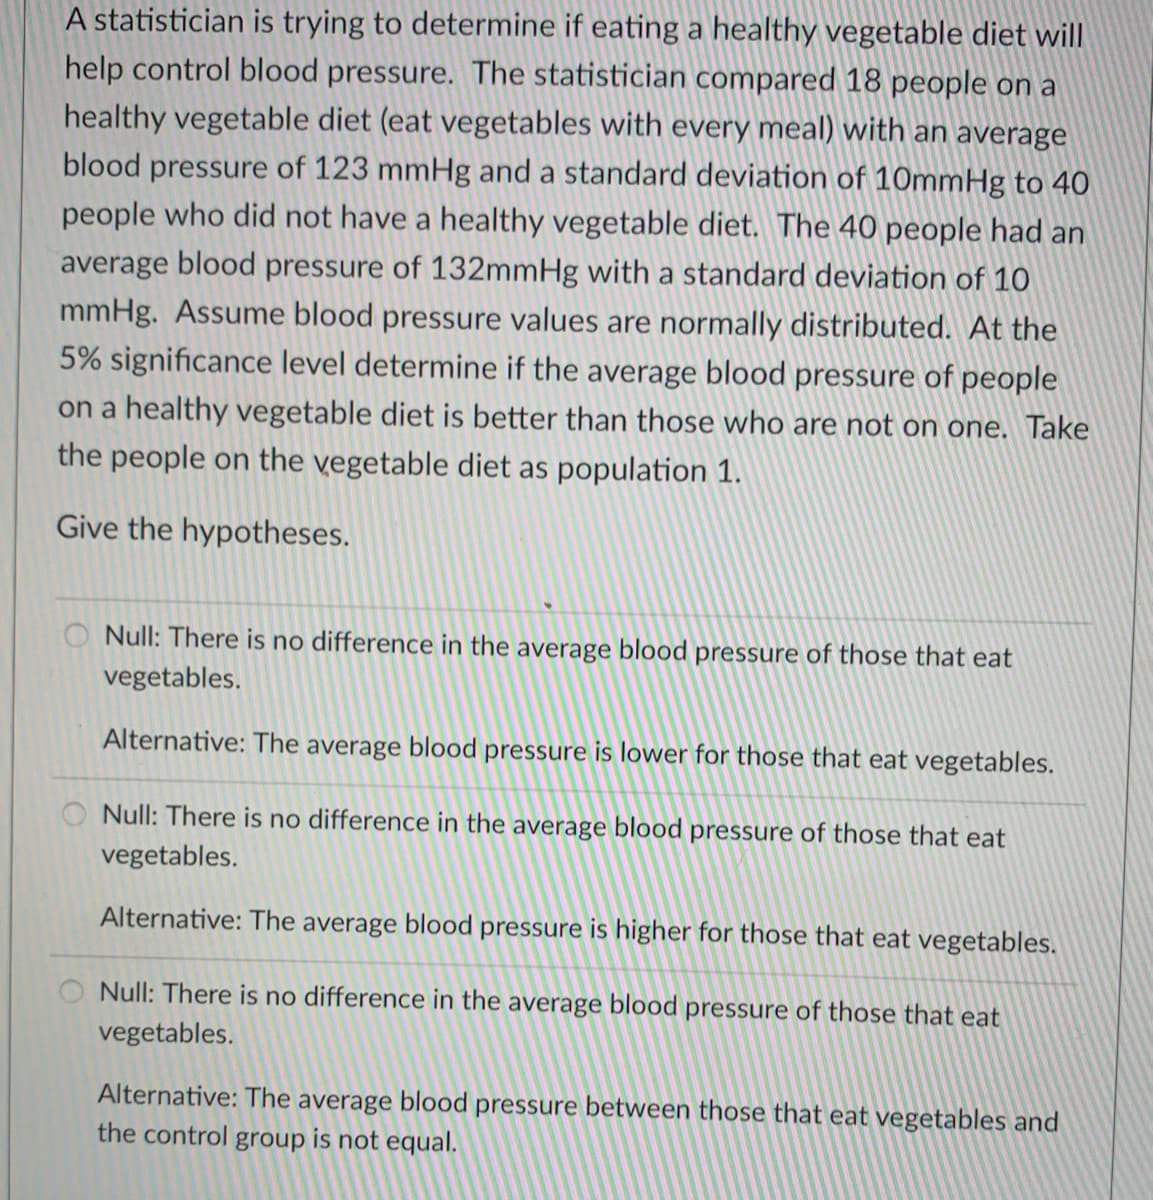 A statistician is trying to determine if eating a healthy vegetable diet will
help control blood pressure. The statistician compared 18 people on a
healthy vegetable diet (eat vegetables with every meal) with an average
blood pressure of 123 mmHg and a standard deviation of 10mmHg to 40
people who did not have a healthy vegetable diet. The 40 people had an
average blood pressure of 132mmHg with a standard deviation of 10
mmHg. Assume blood pressure values are normally distributed. At the
5% significance level determine if the average blood pressure of people
on a healthy vegetable diet is better than those who are not on one. Take
the people on the vegetable diet as population 1.
Give the hypotheses.
O Null: There is no difference in the average blood pressure of those that eat
vegetables.
Alternative: The average blood pressure is lower for those that eat vegetables.
Null: There is no difference in the average blood pressure of those that eat
vegetables.
Alternative: The average blood pressure is higher for those that eat vegetables.
Null: There is no difference in the average blood pressure of those that eat
vegetables.
Alternative: The average blood pressure between those that eat vegetables and
the control group is not equal.
